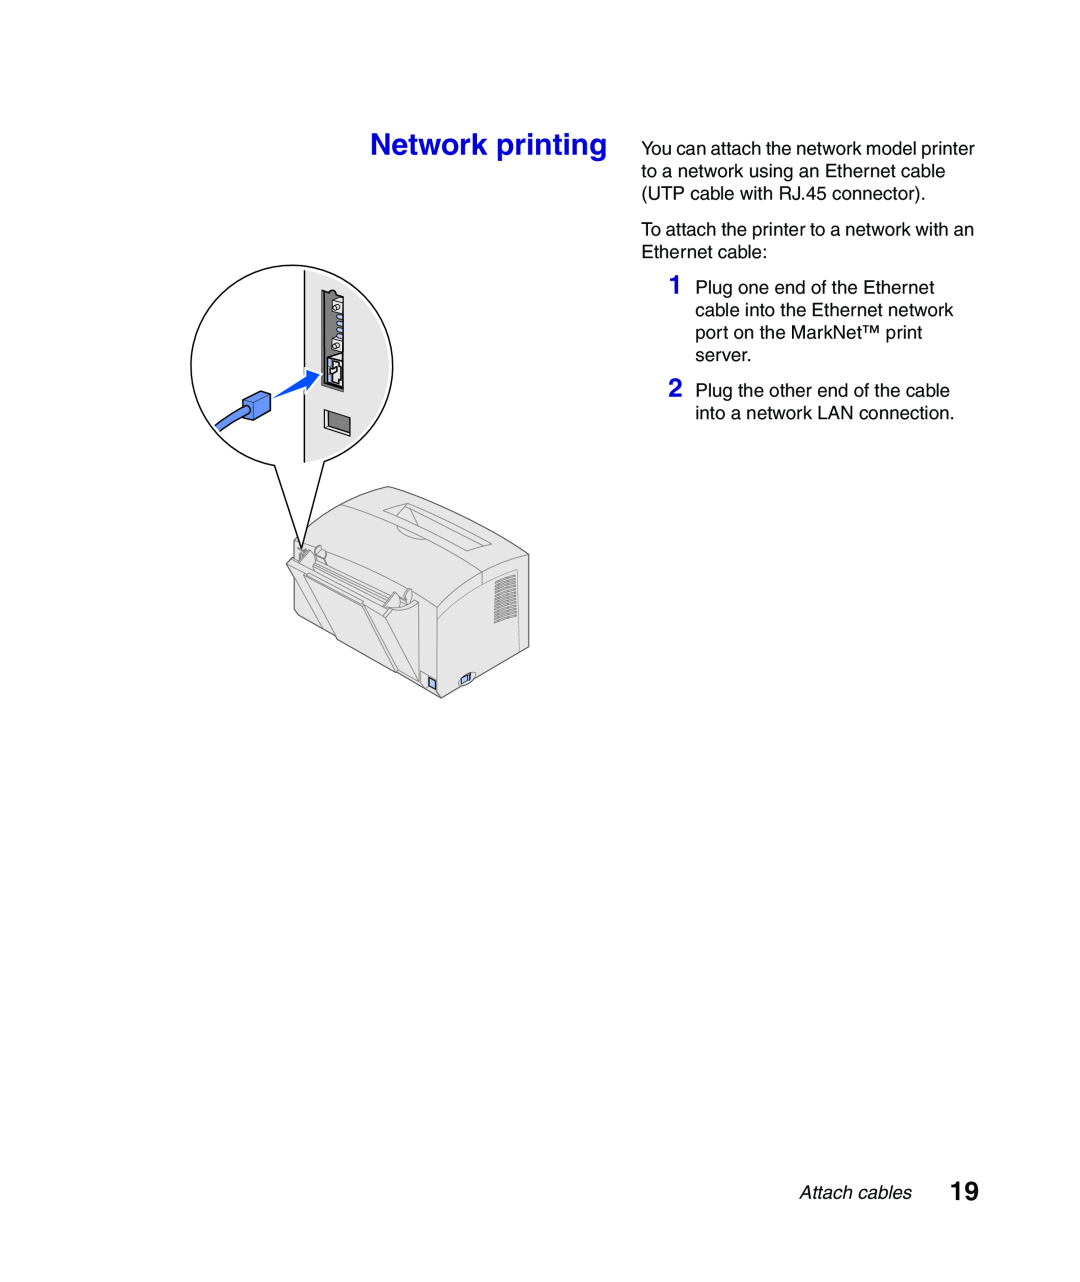 Lexmark Infoprint 1116 setup guide To attach the printer to a network with an Ethernet cable, Attach cables 